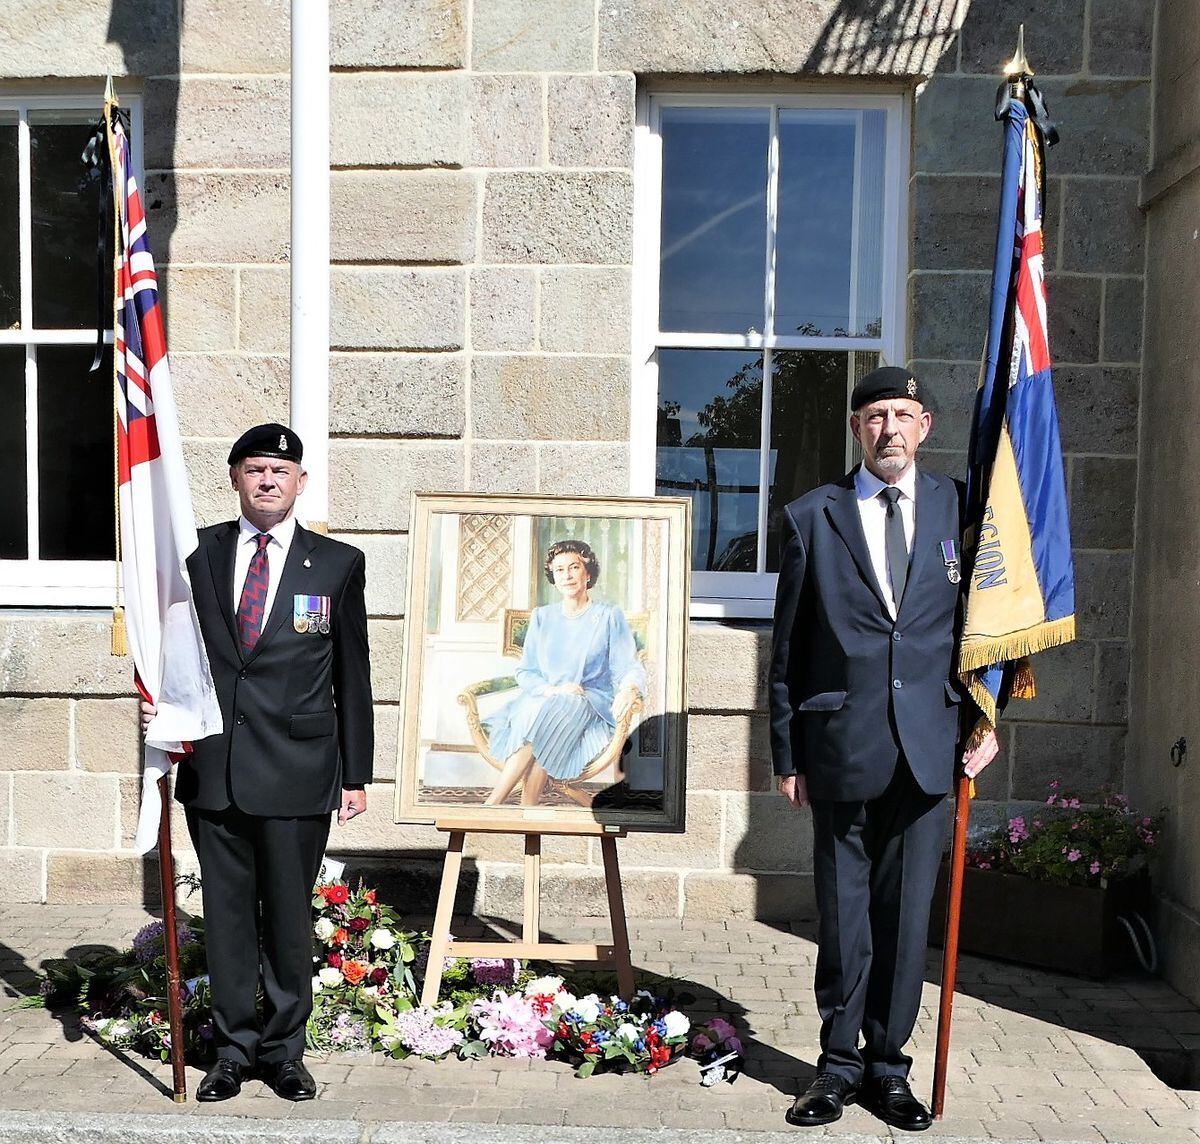 Islanders’ floral tributes surround a portrait of the Queen.    Picture by David Nash.                                                                                             (31257686)